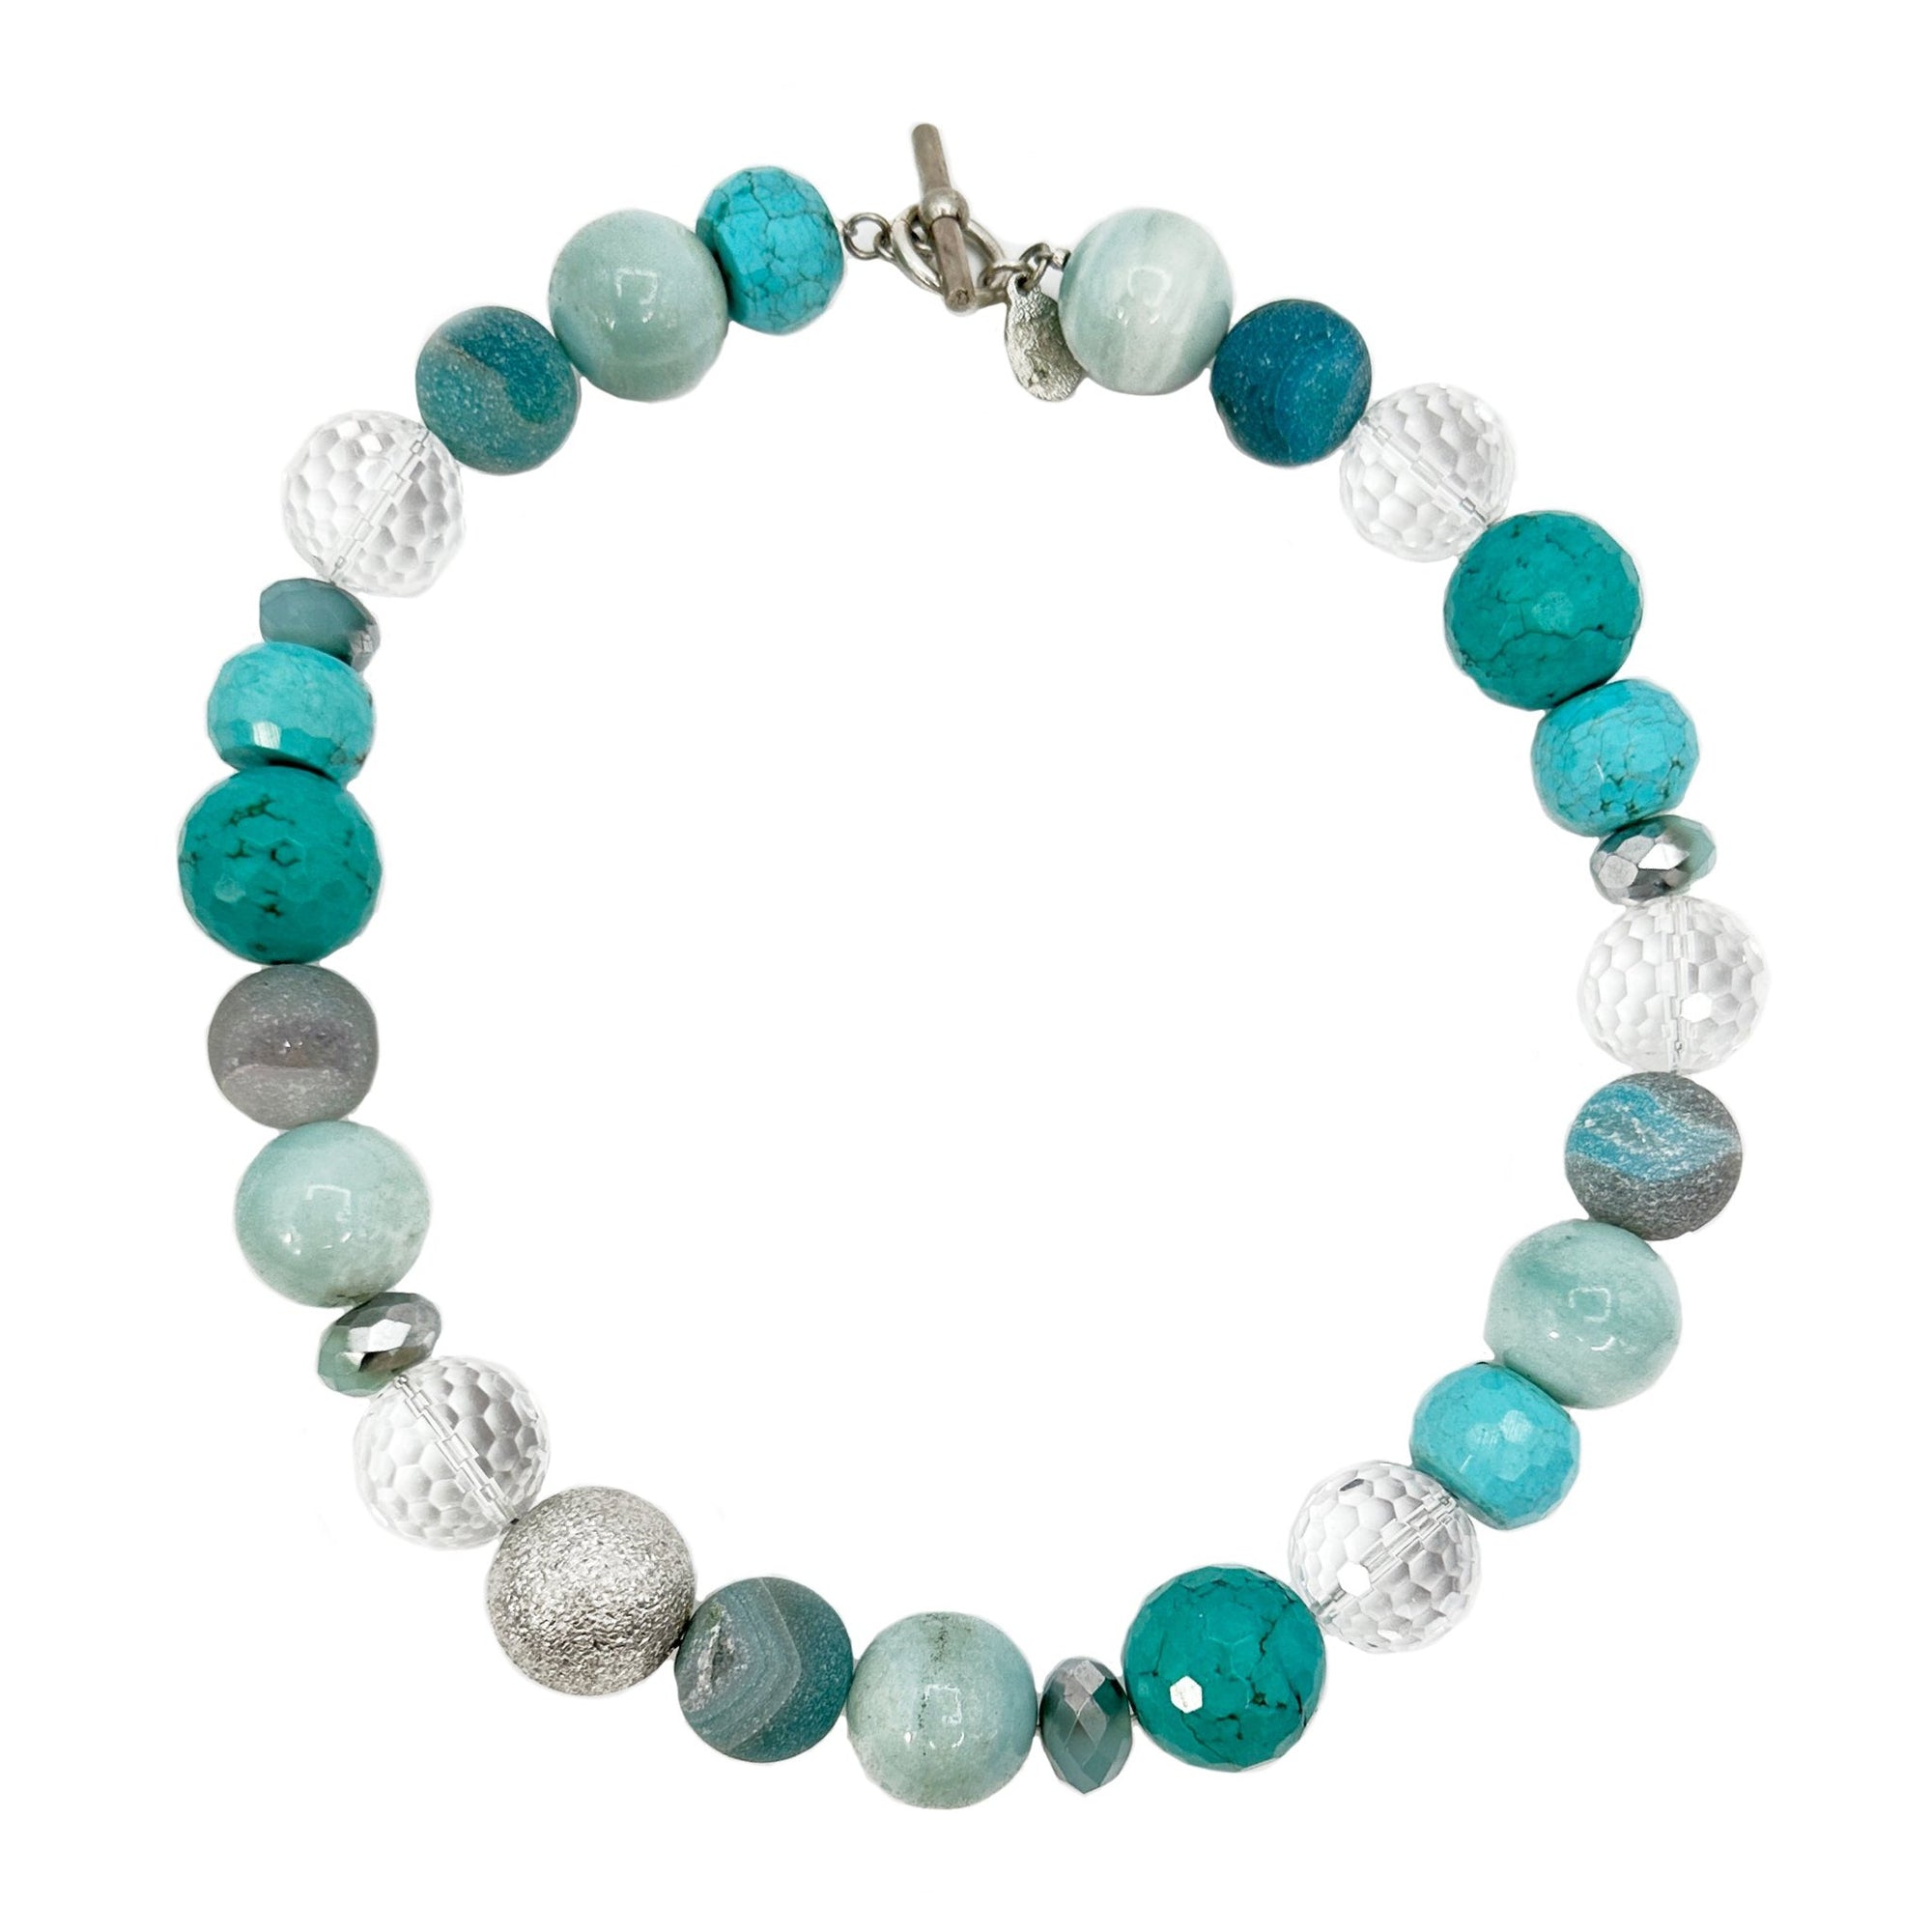 Stone Ball Necklace Turquoise Mix